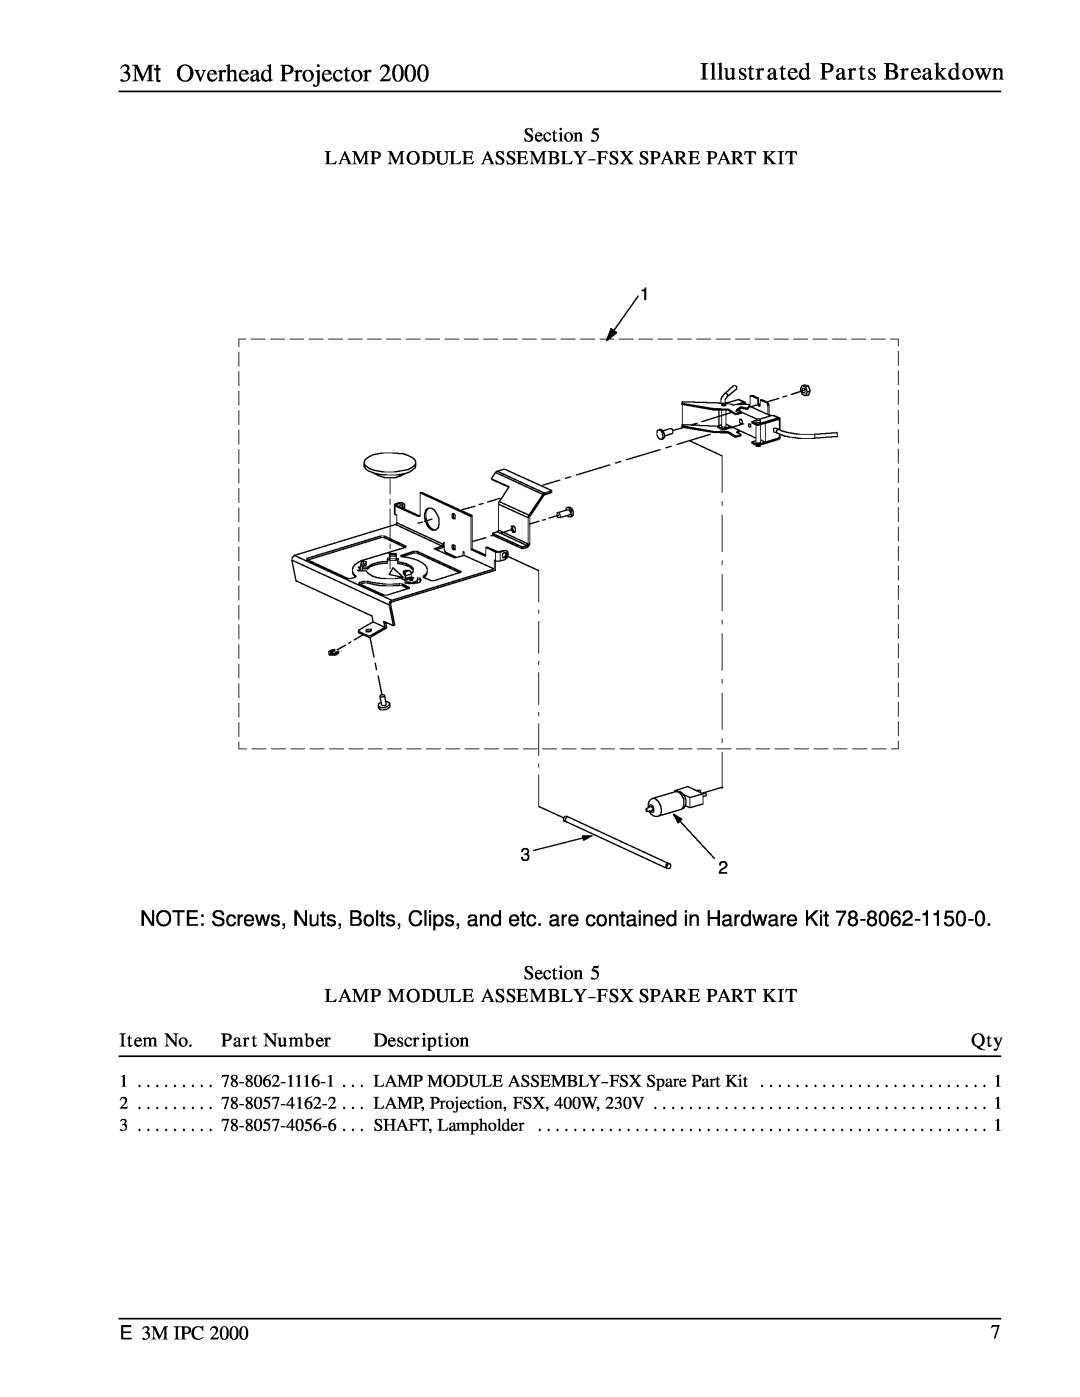 3M 2000 Section LAMP MODULE ASSEMBLY-FSX SPARE PART KIT, 3MtOverhead Projector, Illustrated Parts Breakdown, Description 